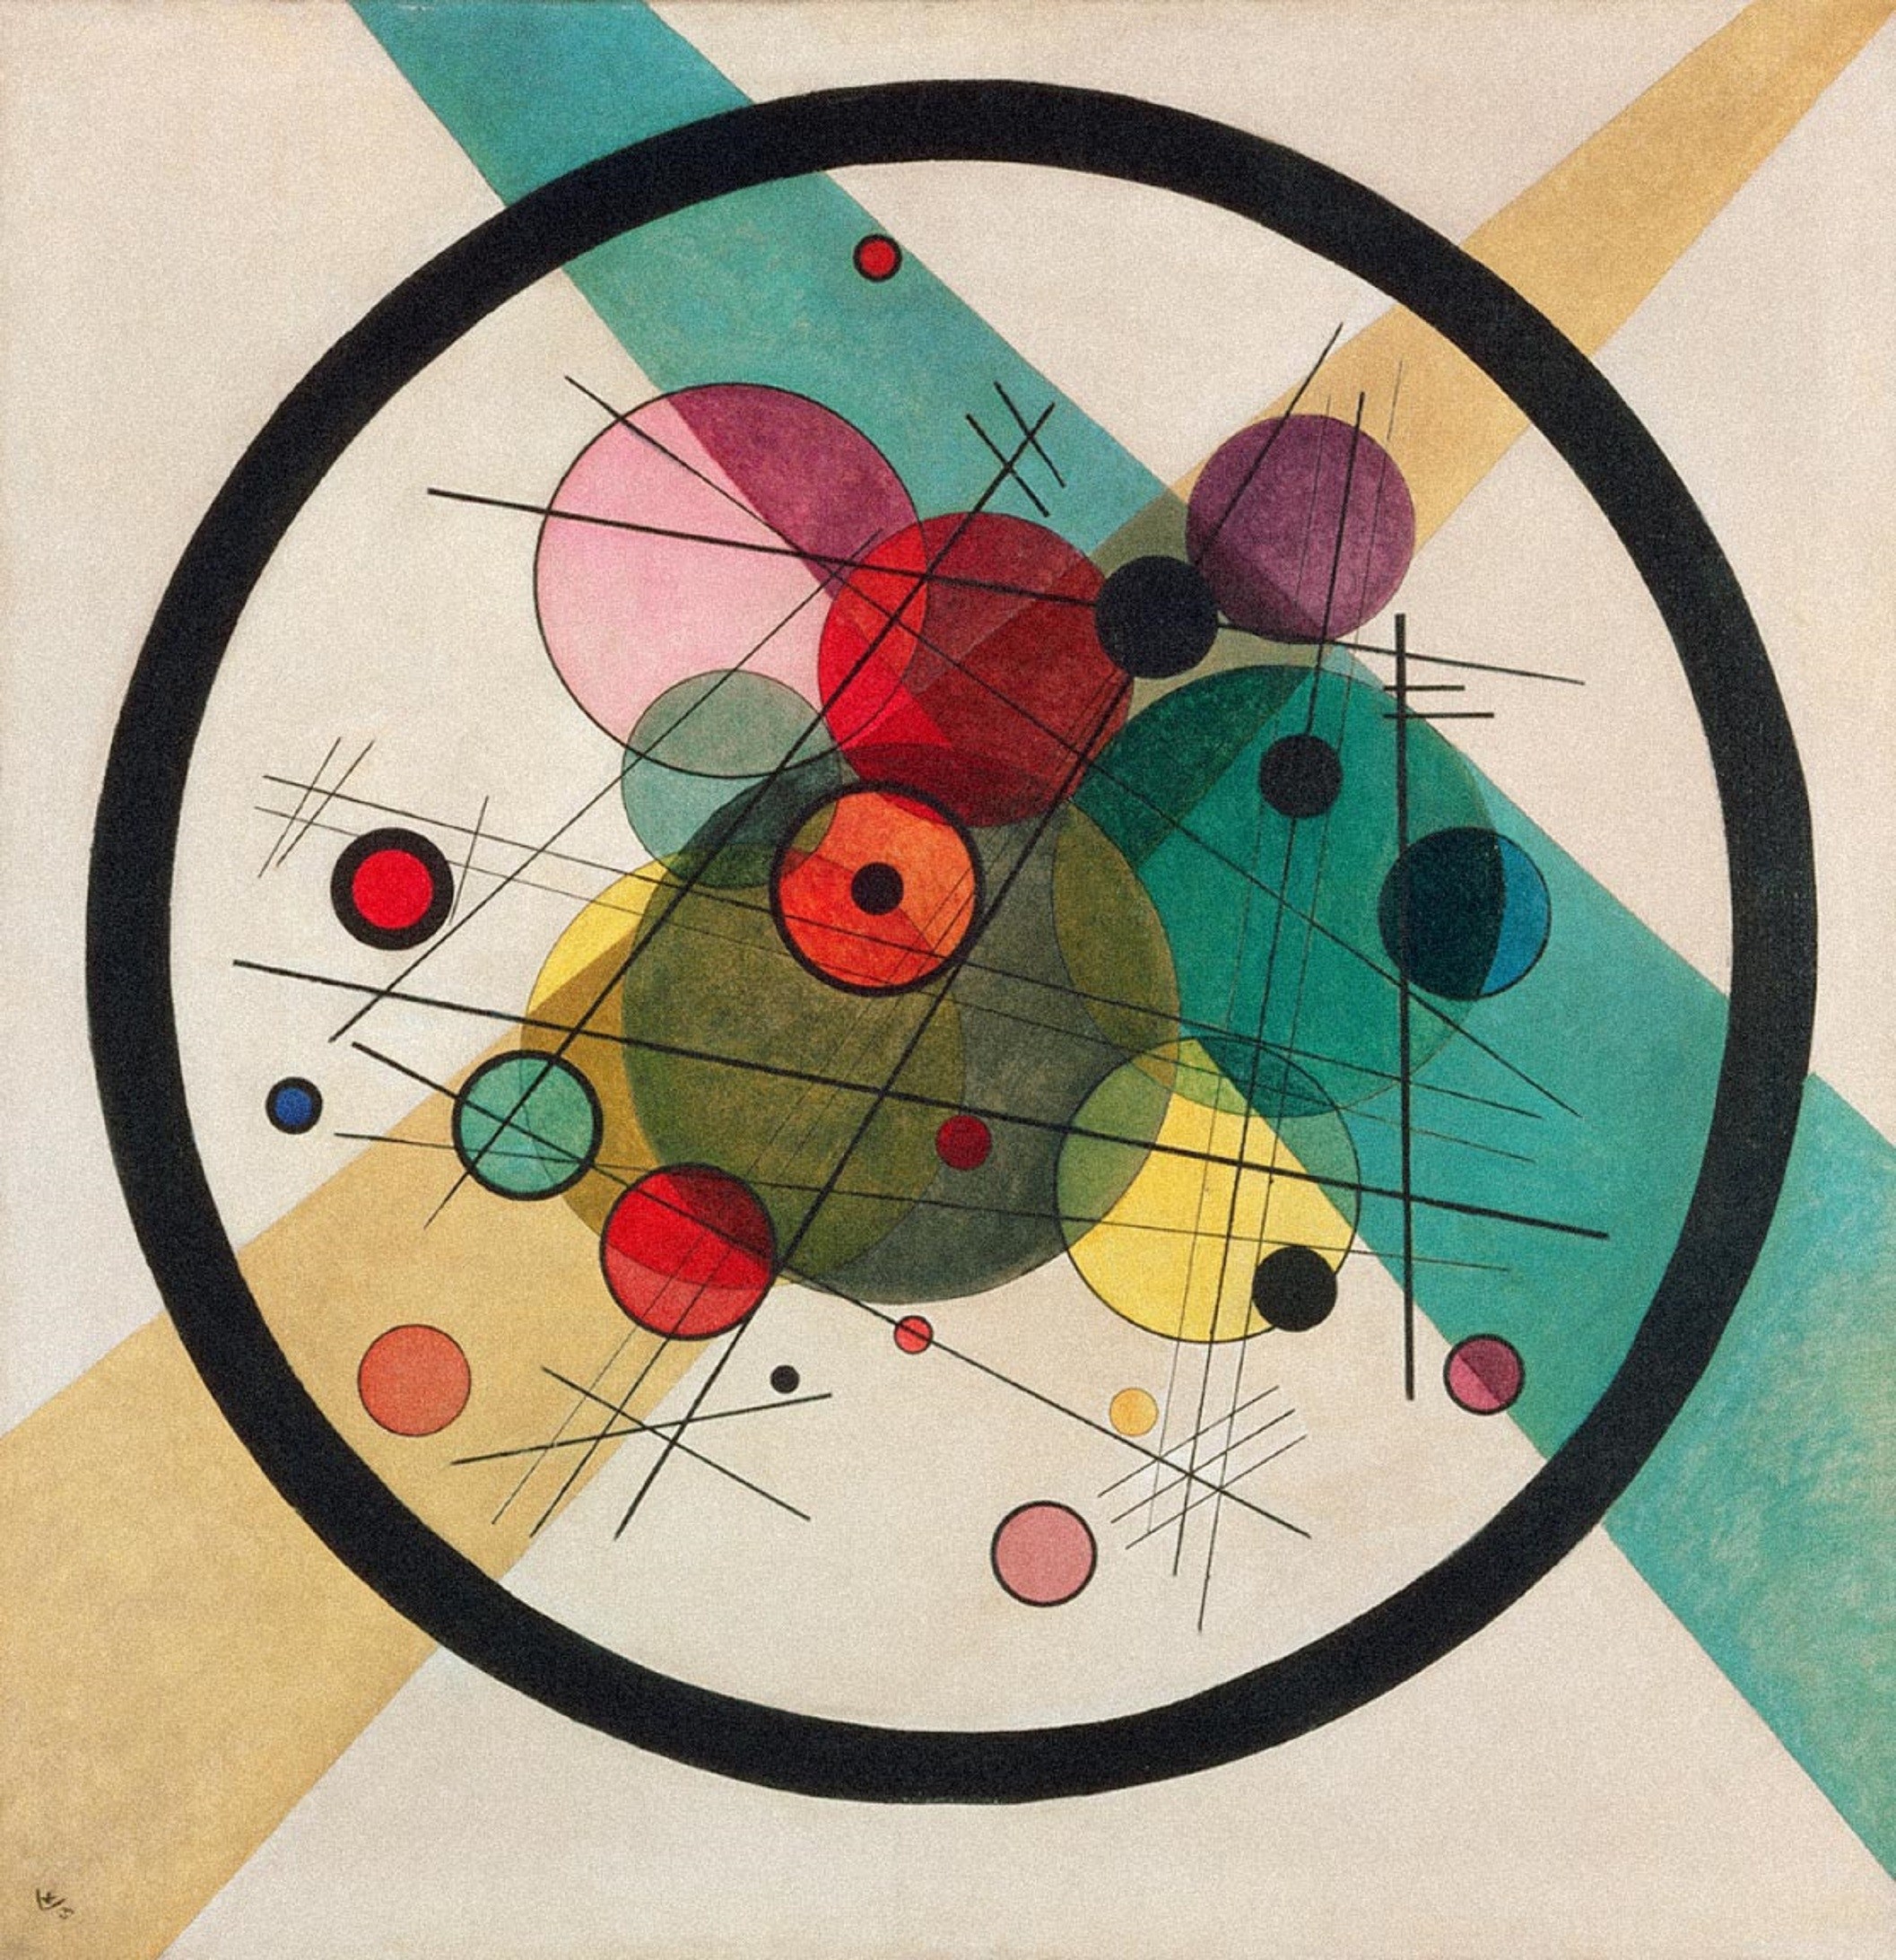 Dynamics of the operad of little disks as envisioned by Wassily Kandinsky ('Circles in a Circle').